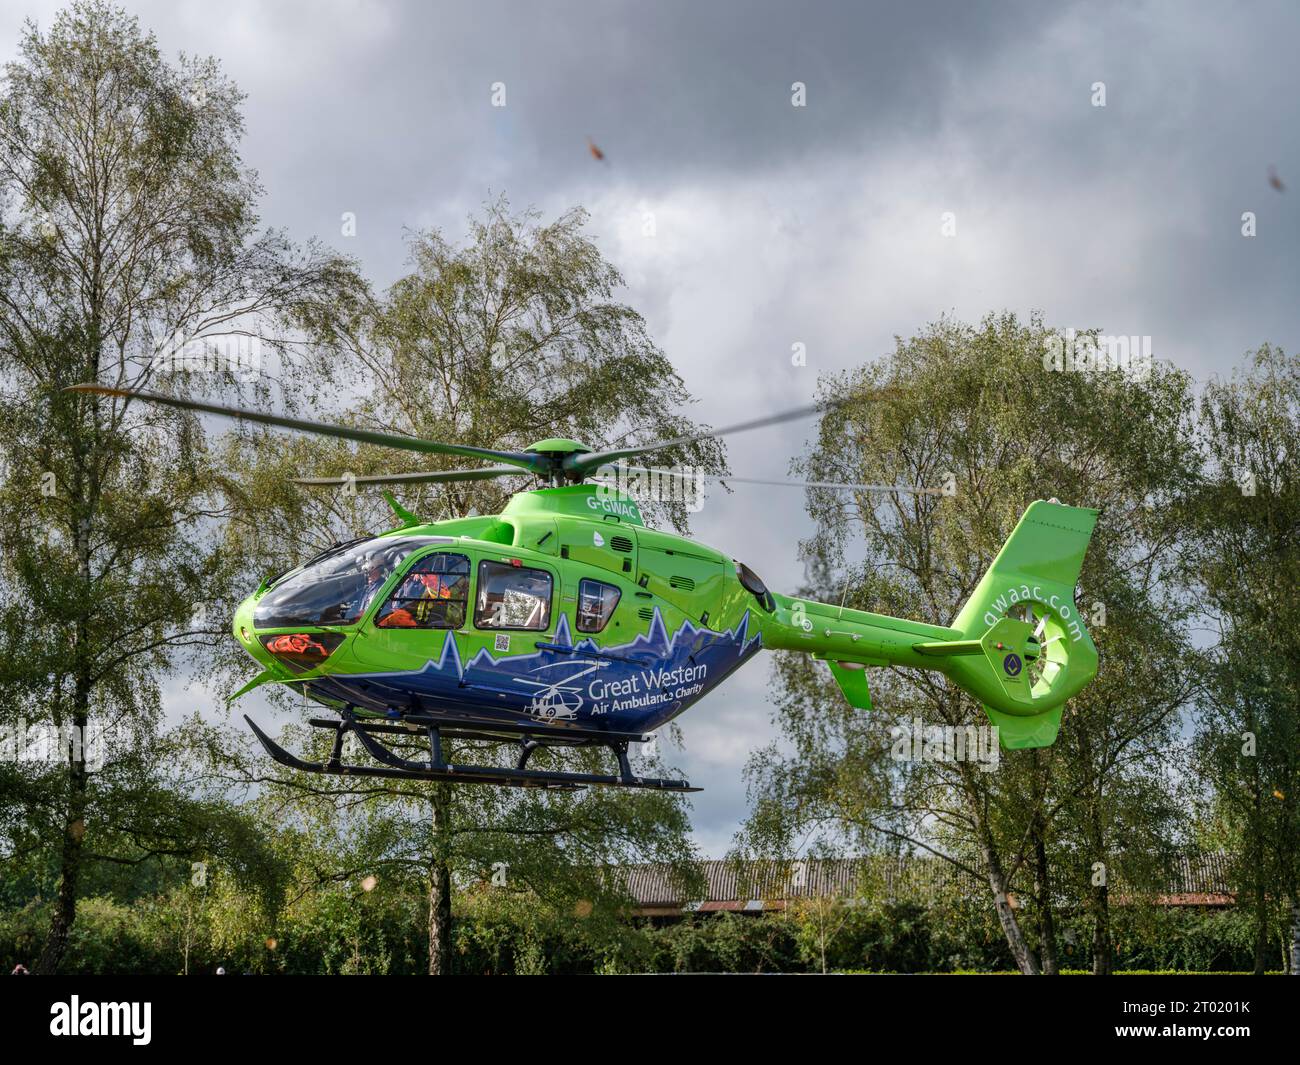 The Great Western Air Ambulance lifts off from outside Gloucester Royal Hospital. The bright lime green and blue helicopter, call sign Helimed 65, is Stock Photo